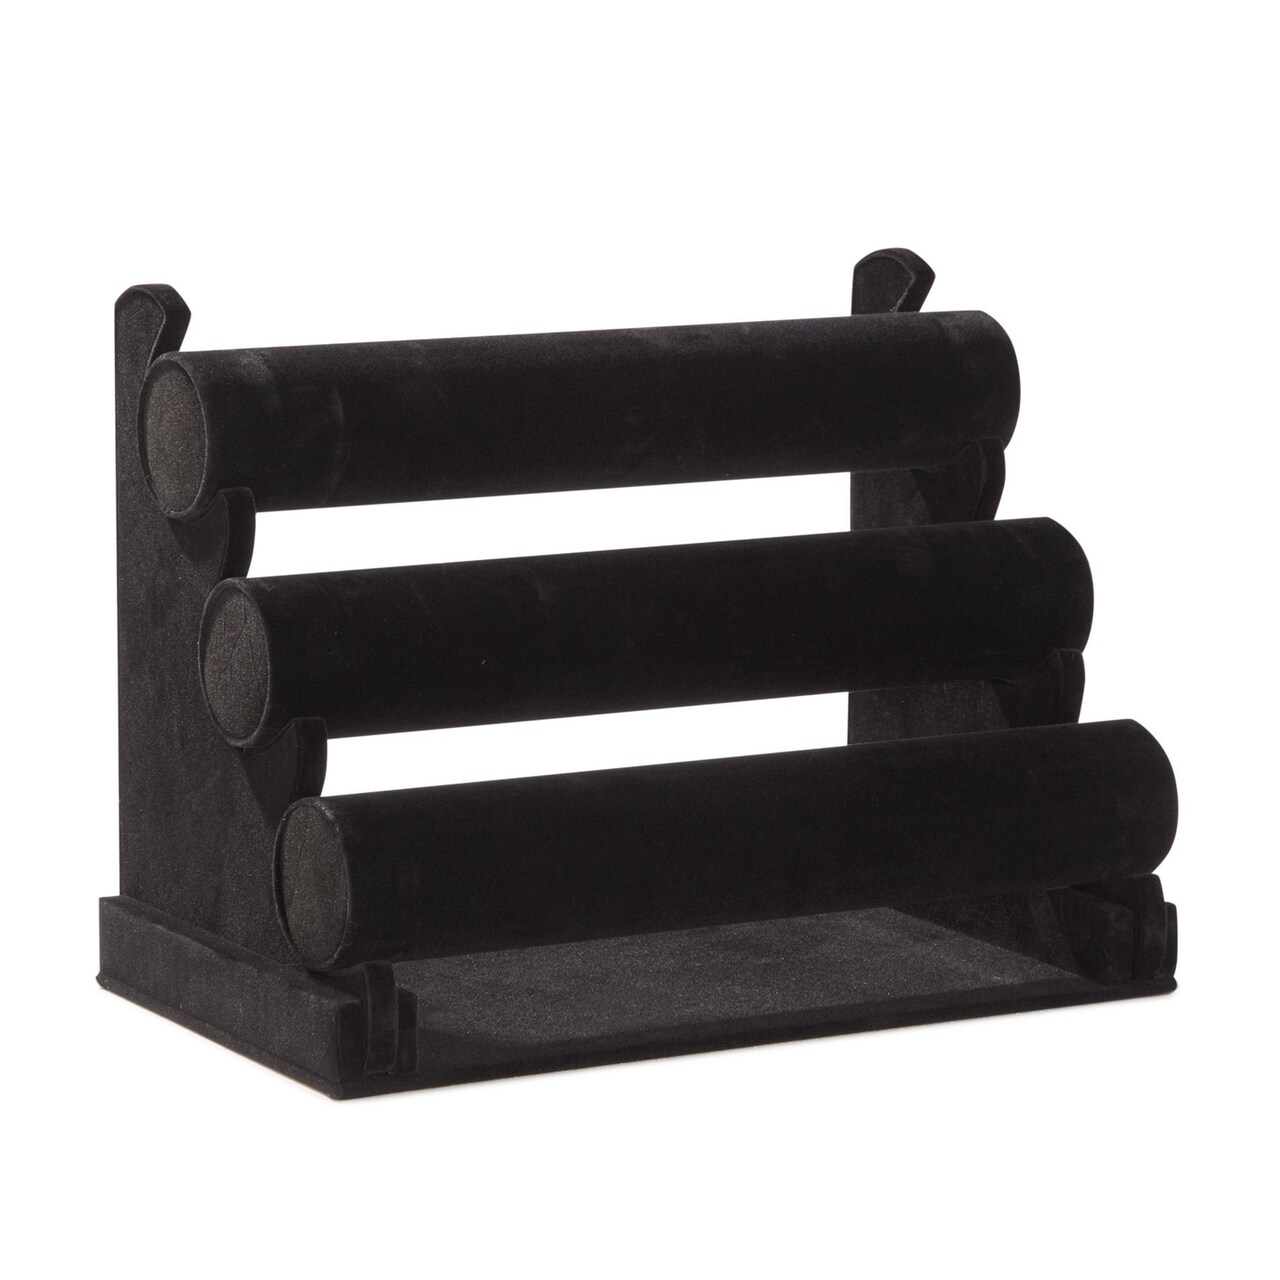 3-Tier Velvet Bracelet Holder Stand and Organizer - Jewelry Display Rack for Selling Necklaces and Accessories (Black)